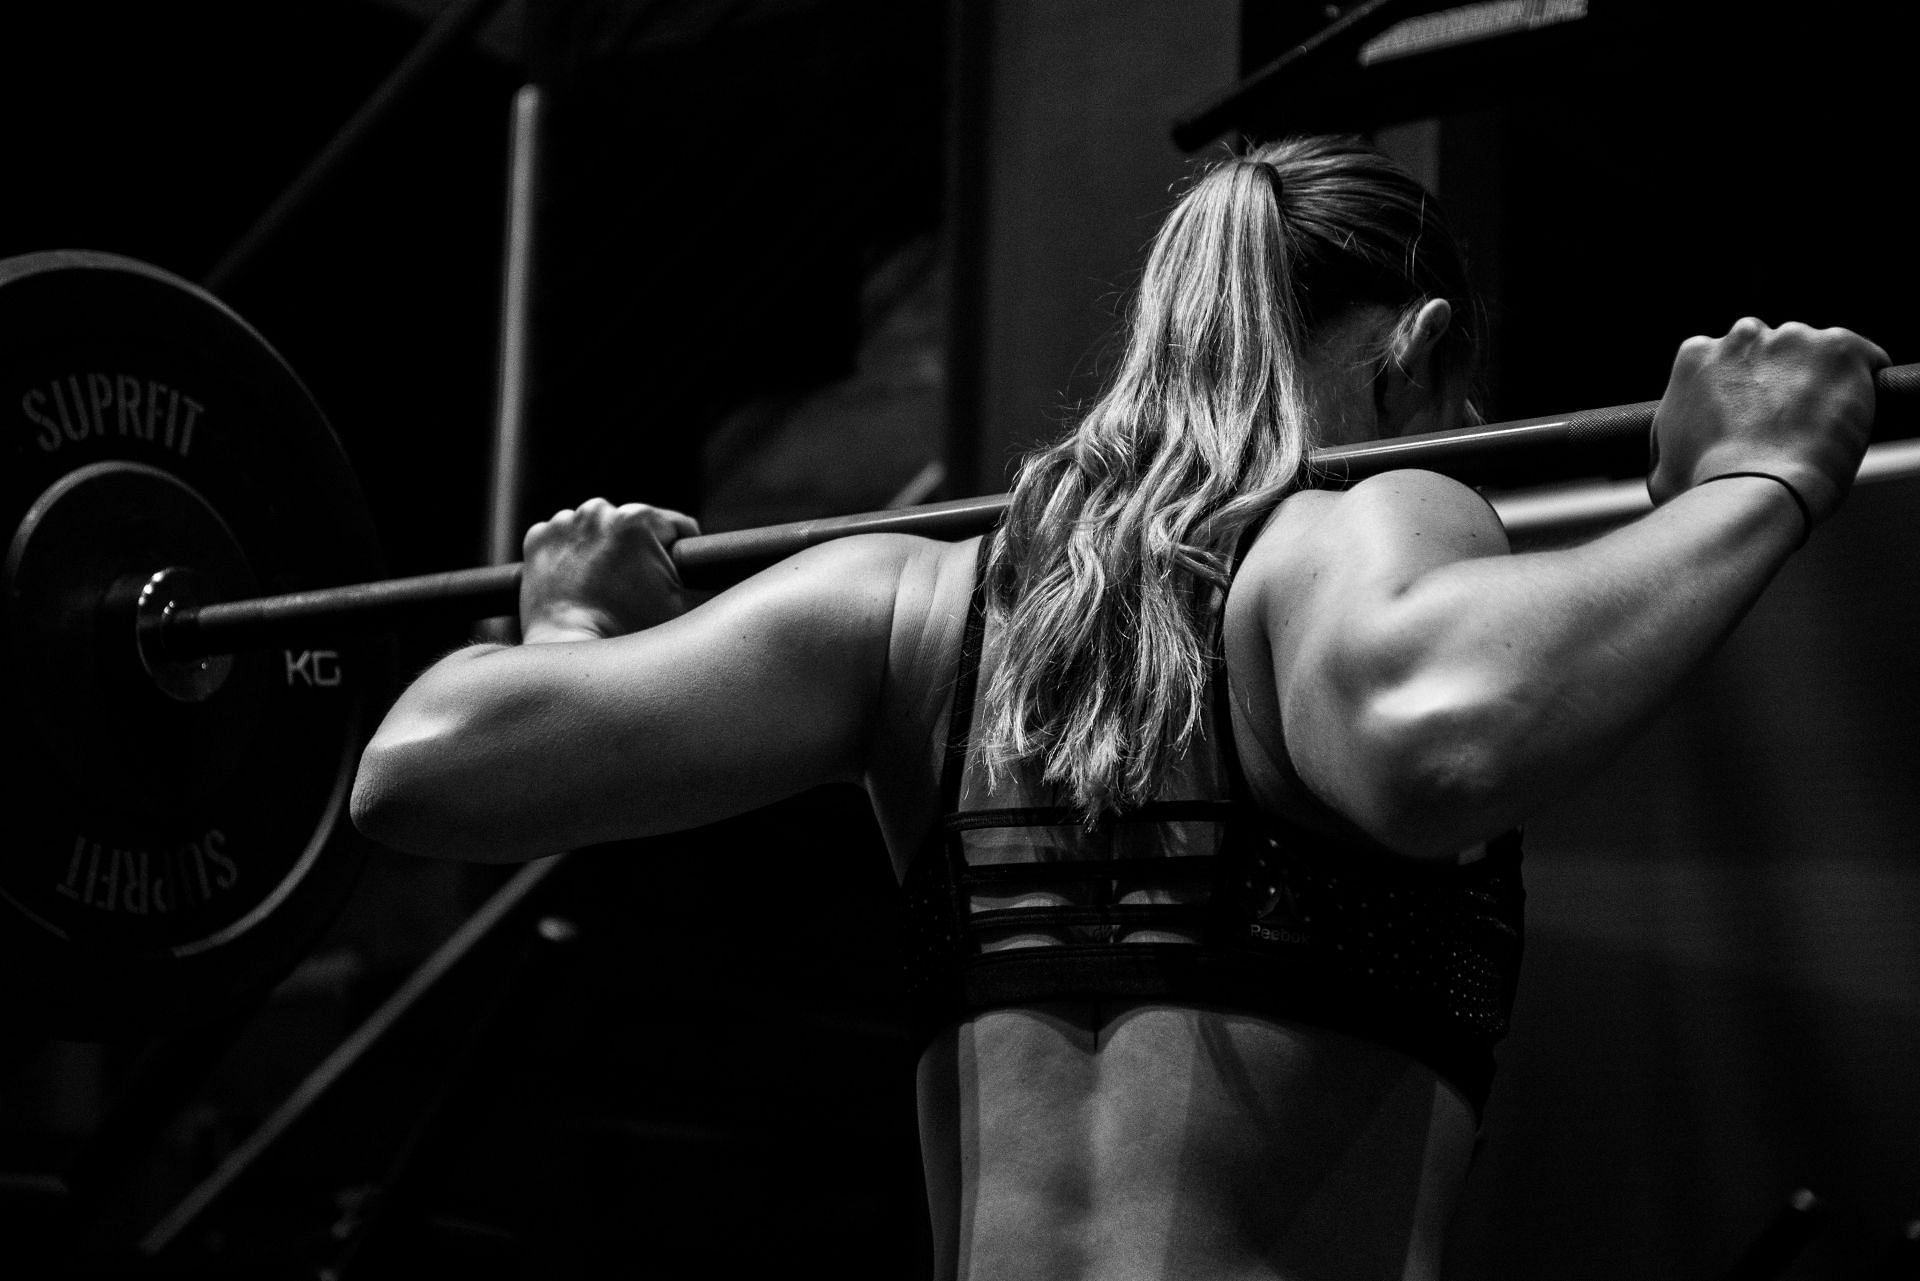 Upright Row Standards for Men and Women (kg) - Strength Level